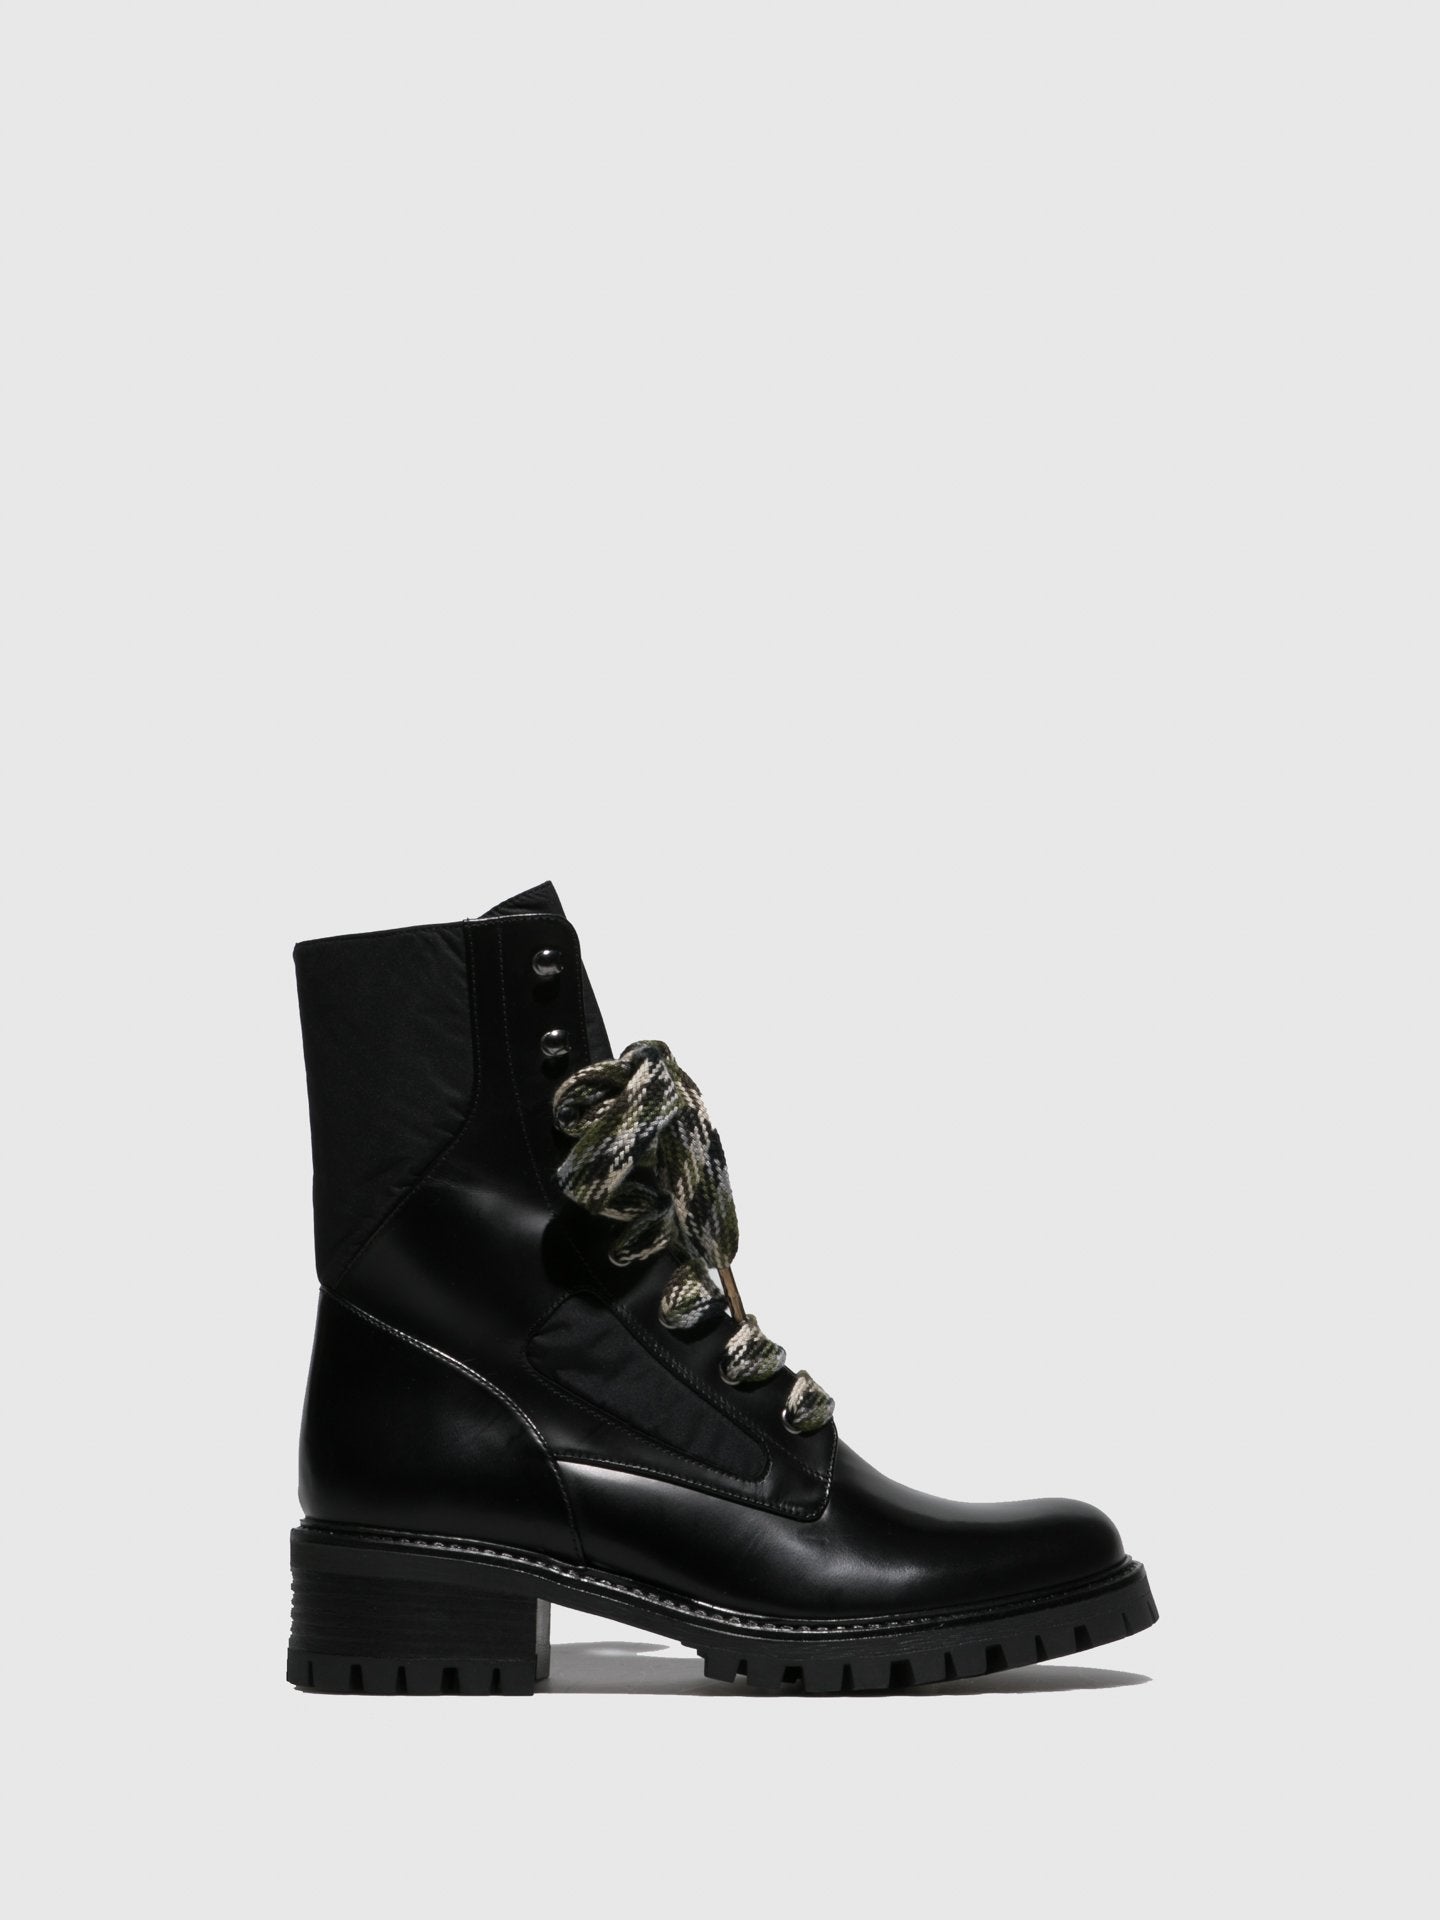 JJ Heitor Black Lace-up Ankle Boots